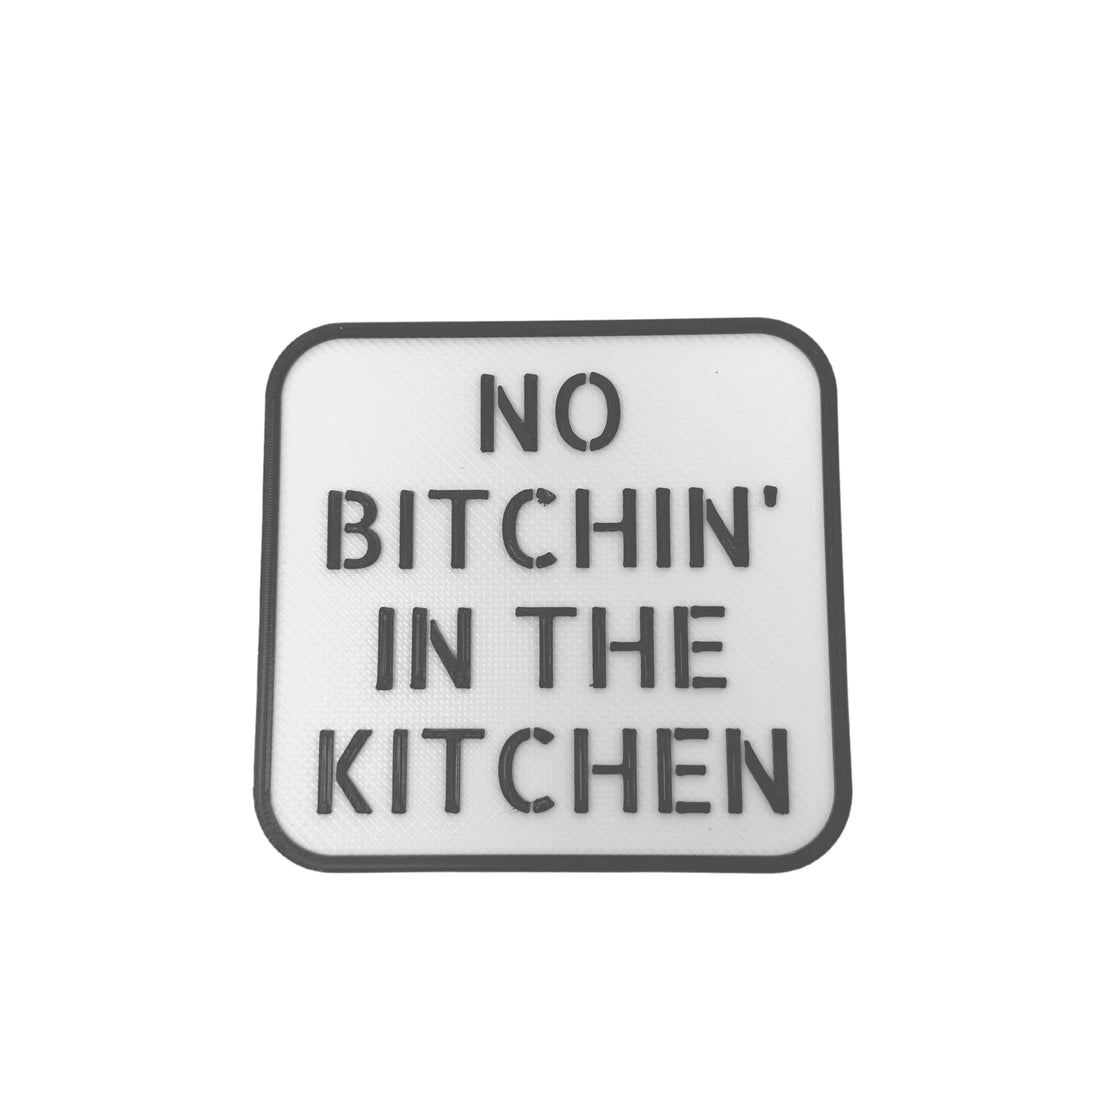 Funny Fridge Magnet Sayings | Improve Your Productivity in The Kitchen | Made in The USA!